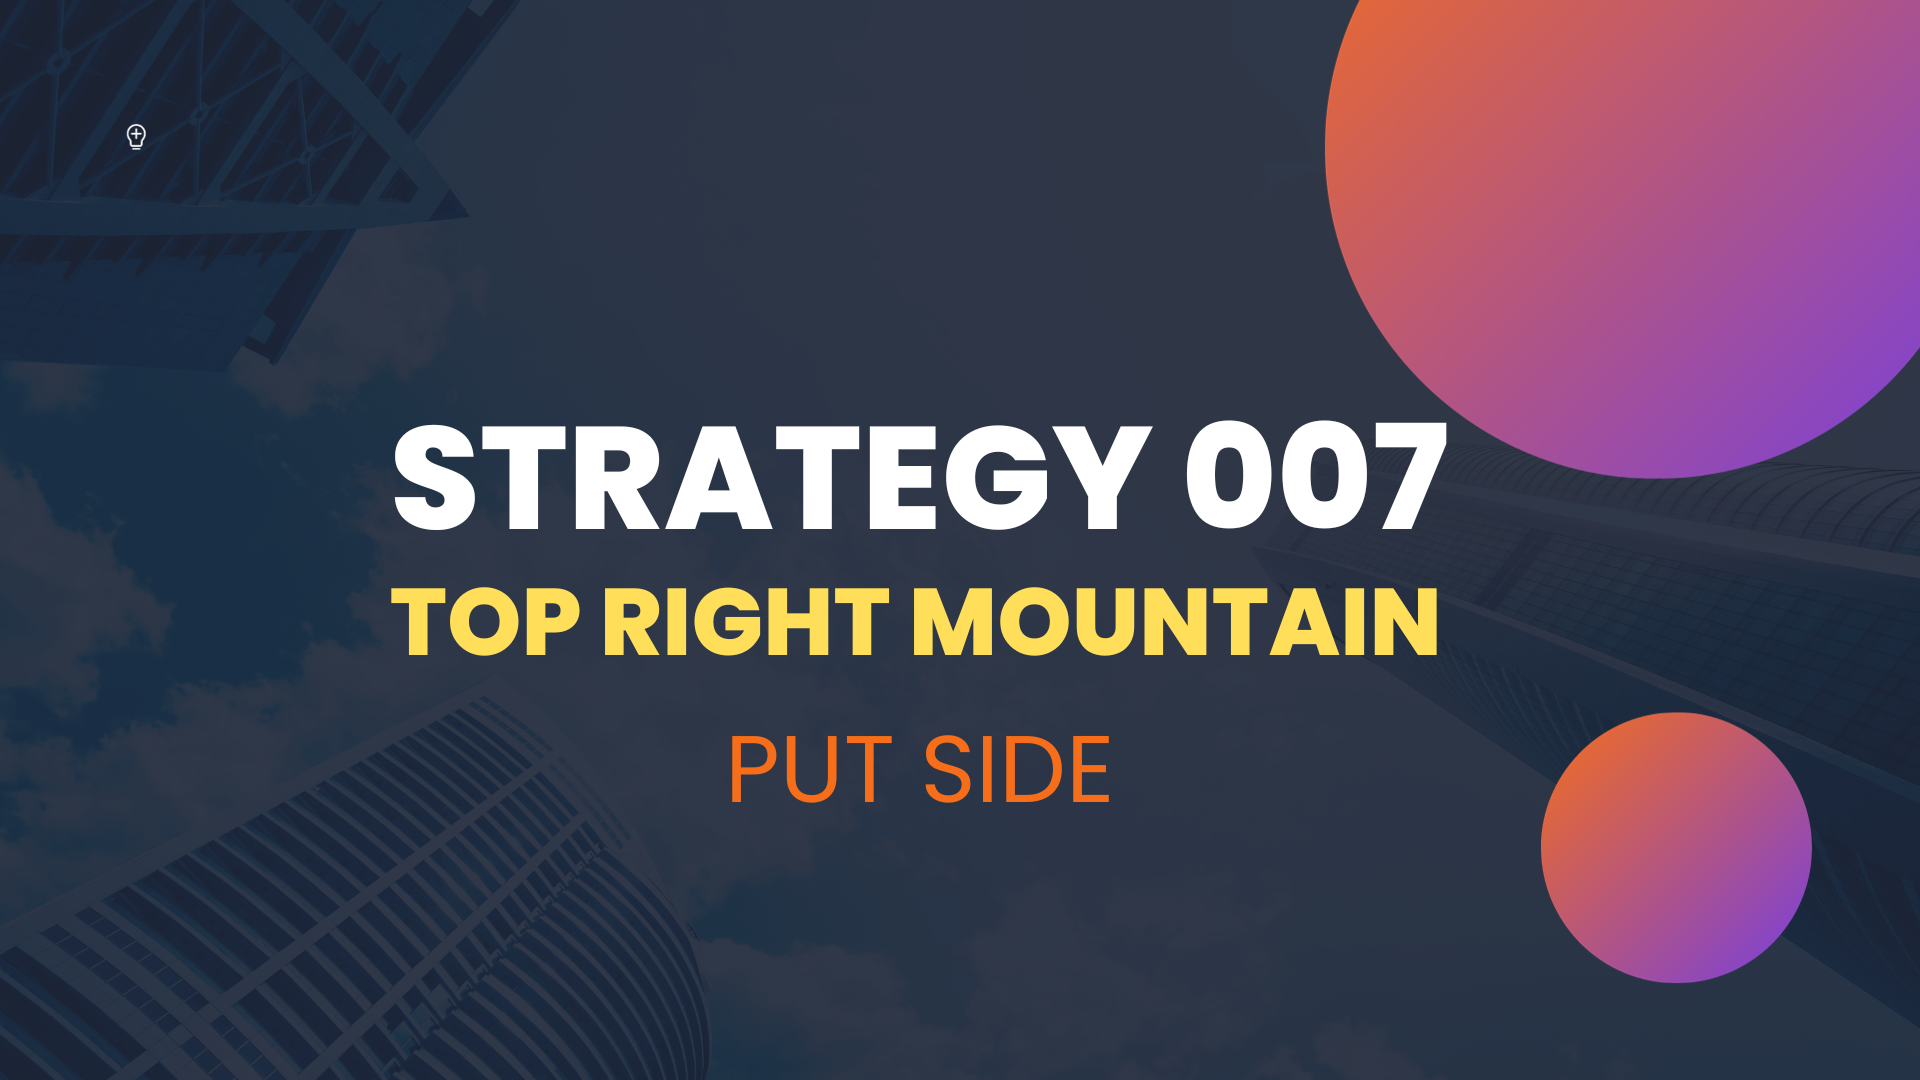 STRATEGY 007